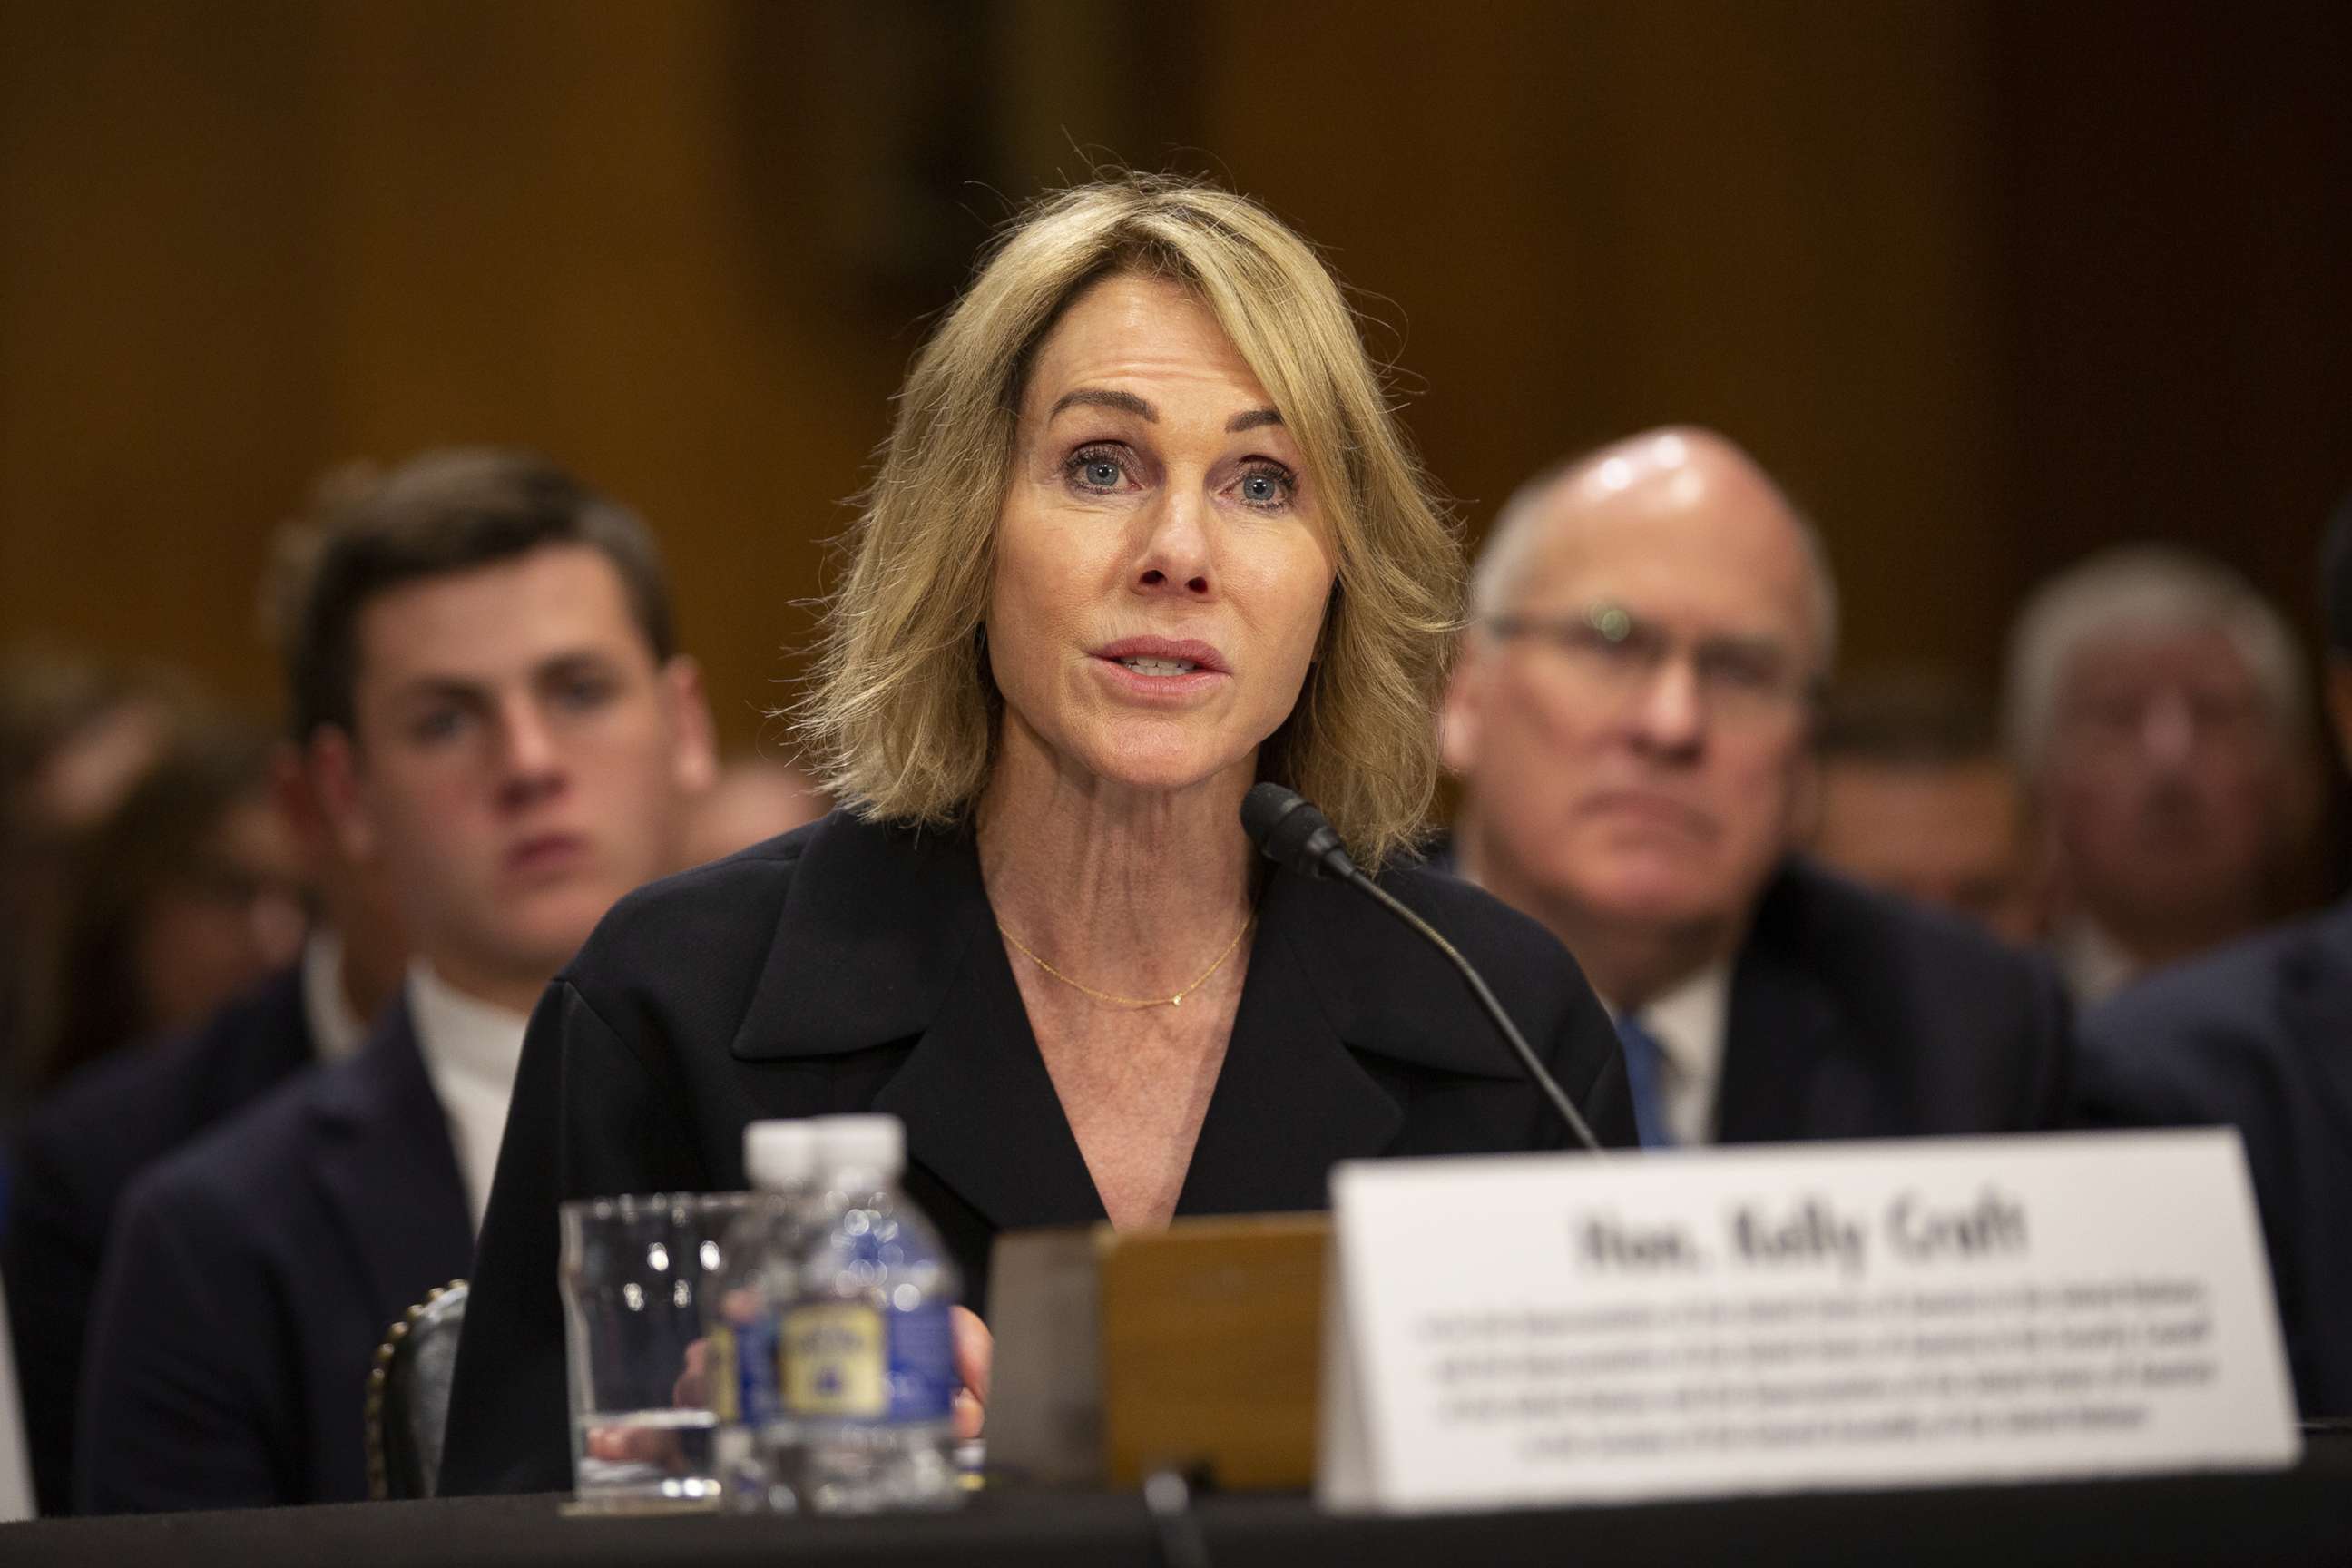 PHOTO: Kelly Craft, President Trump's nominee to be Representative to the United Nations, testifies at her nomination hearing before the Senate Foreign Relations Committee on June 19, 2019, in Washington.